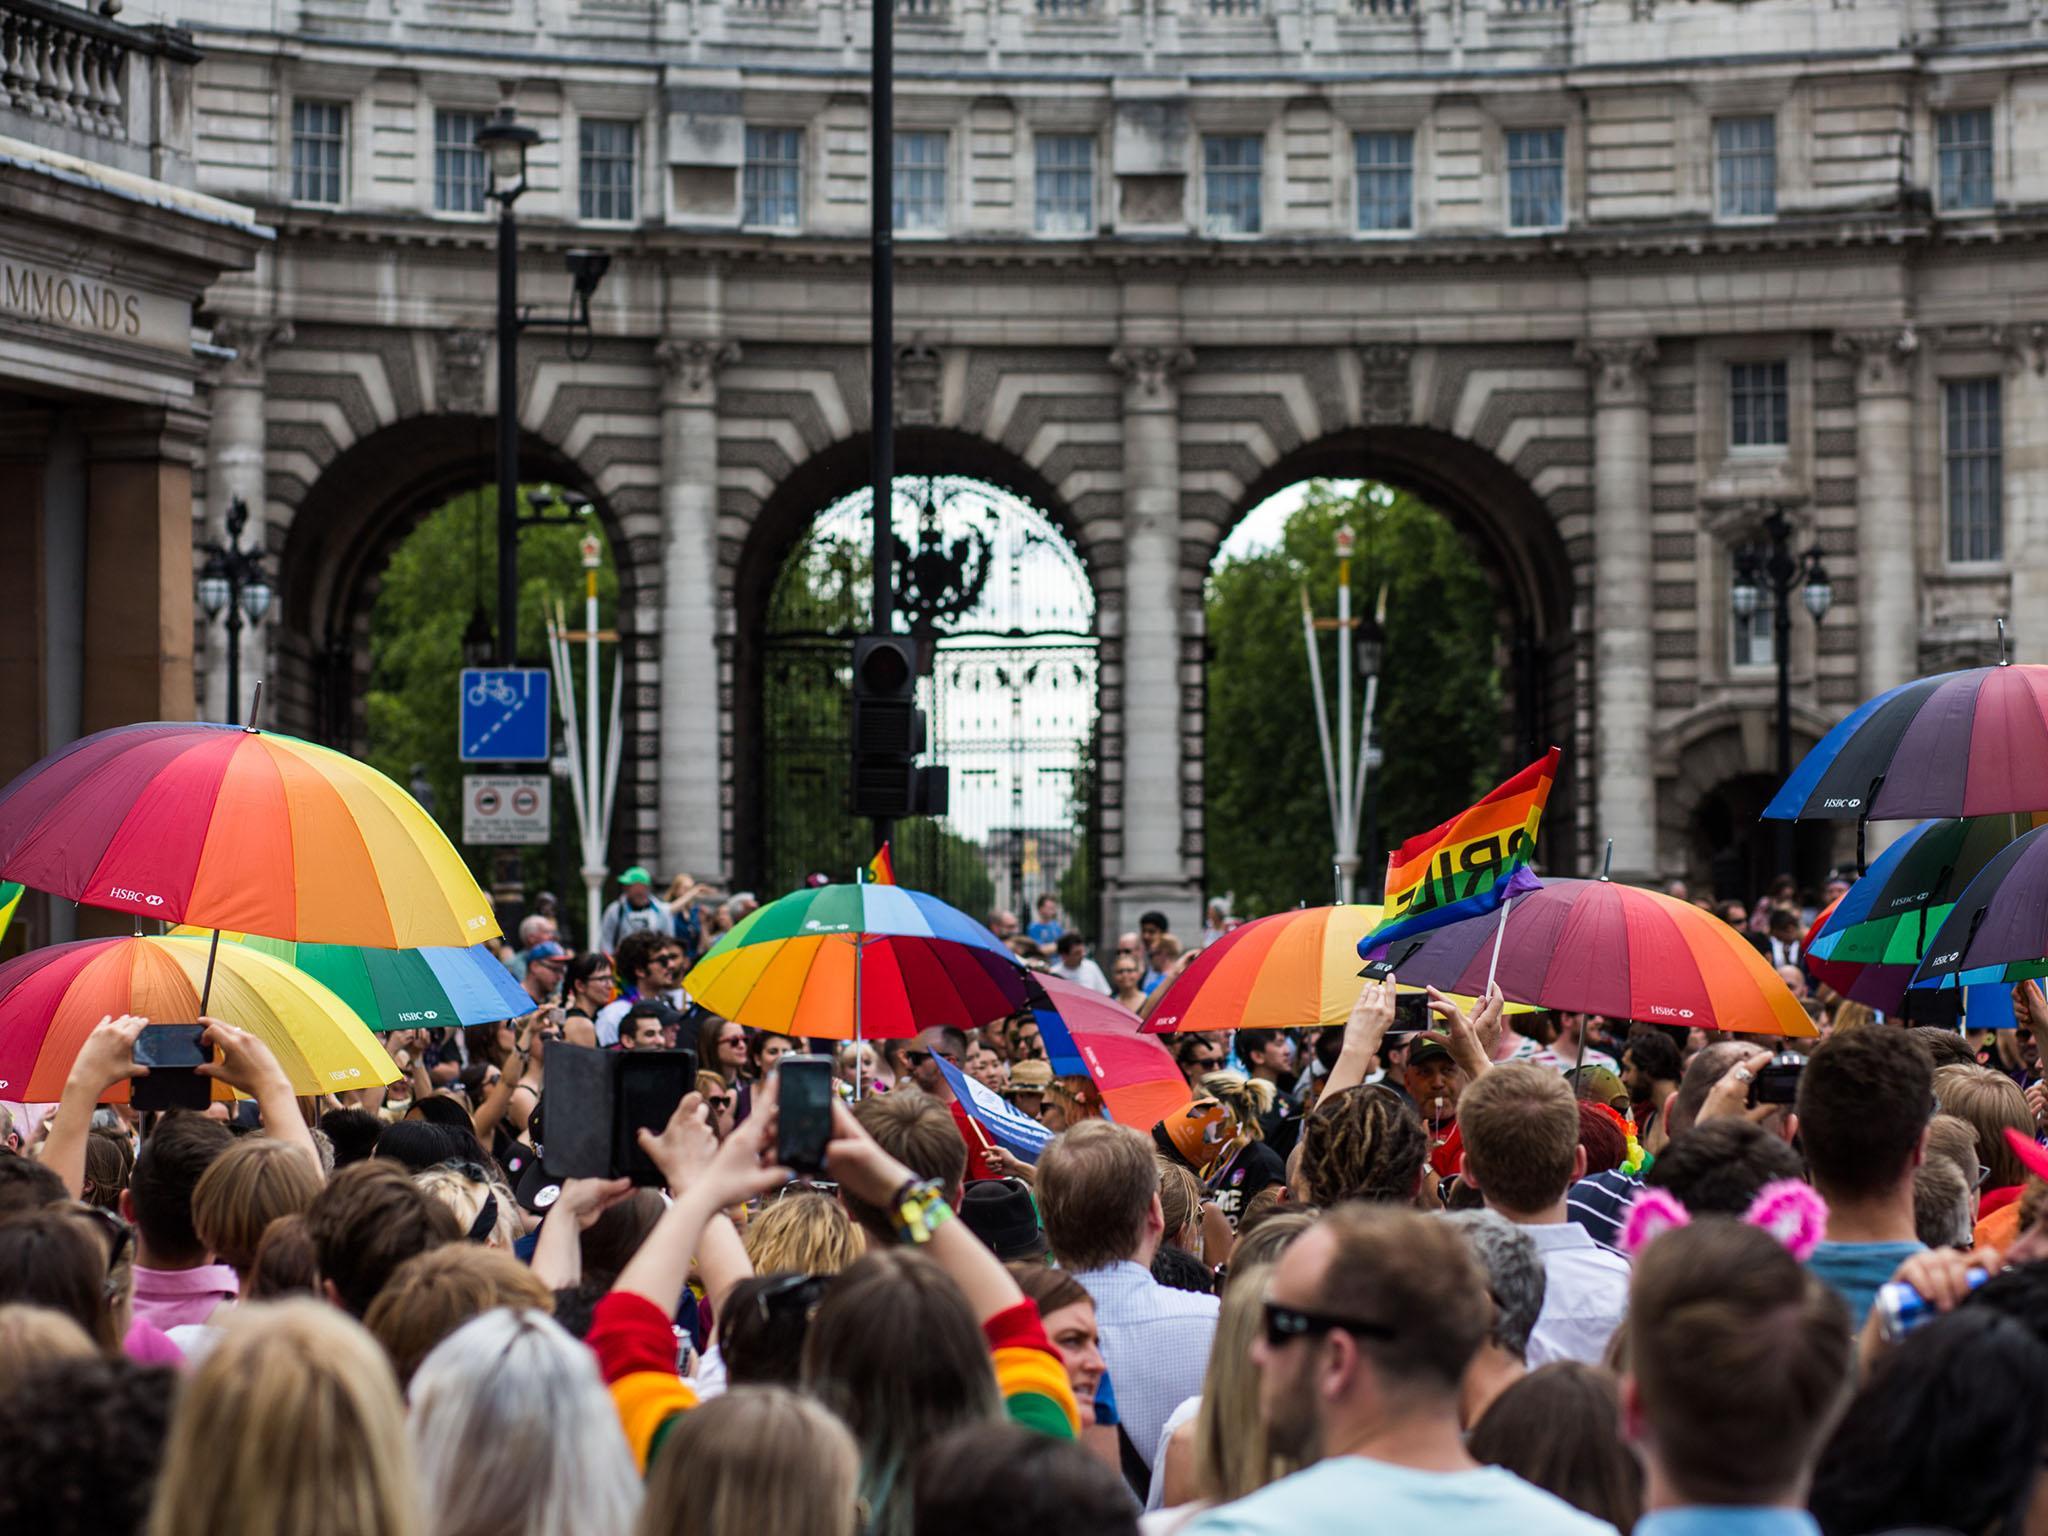 Michael Salter-Church, chair of Pride in London, says the findings underline the importance of the event